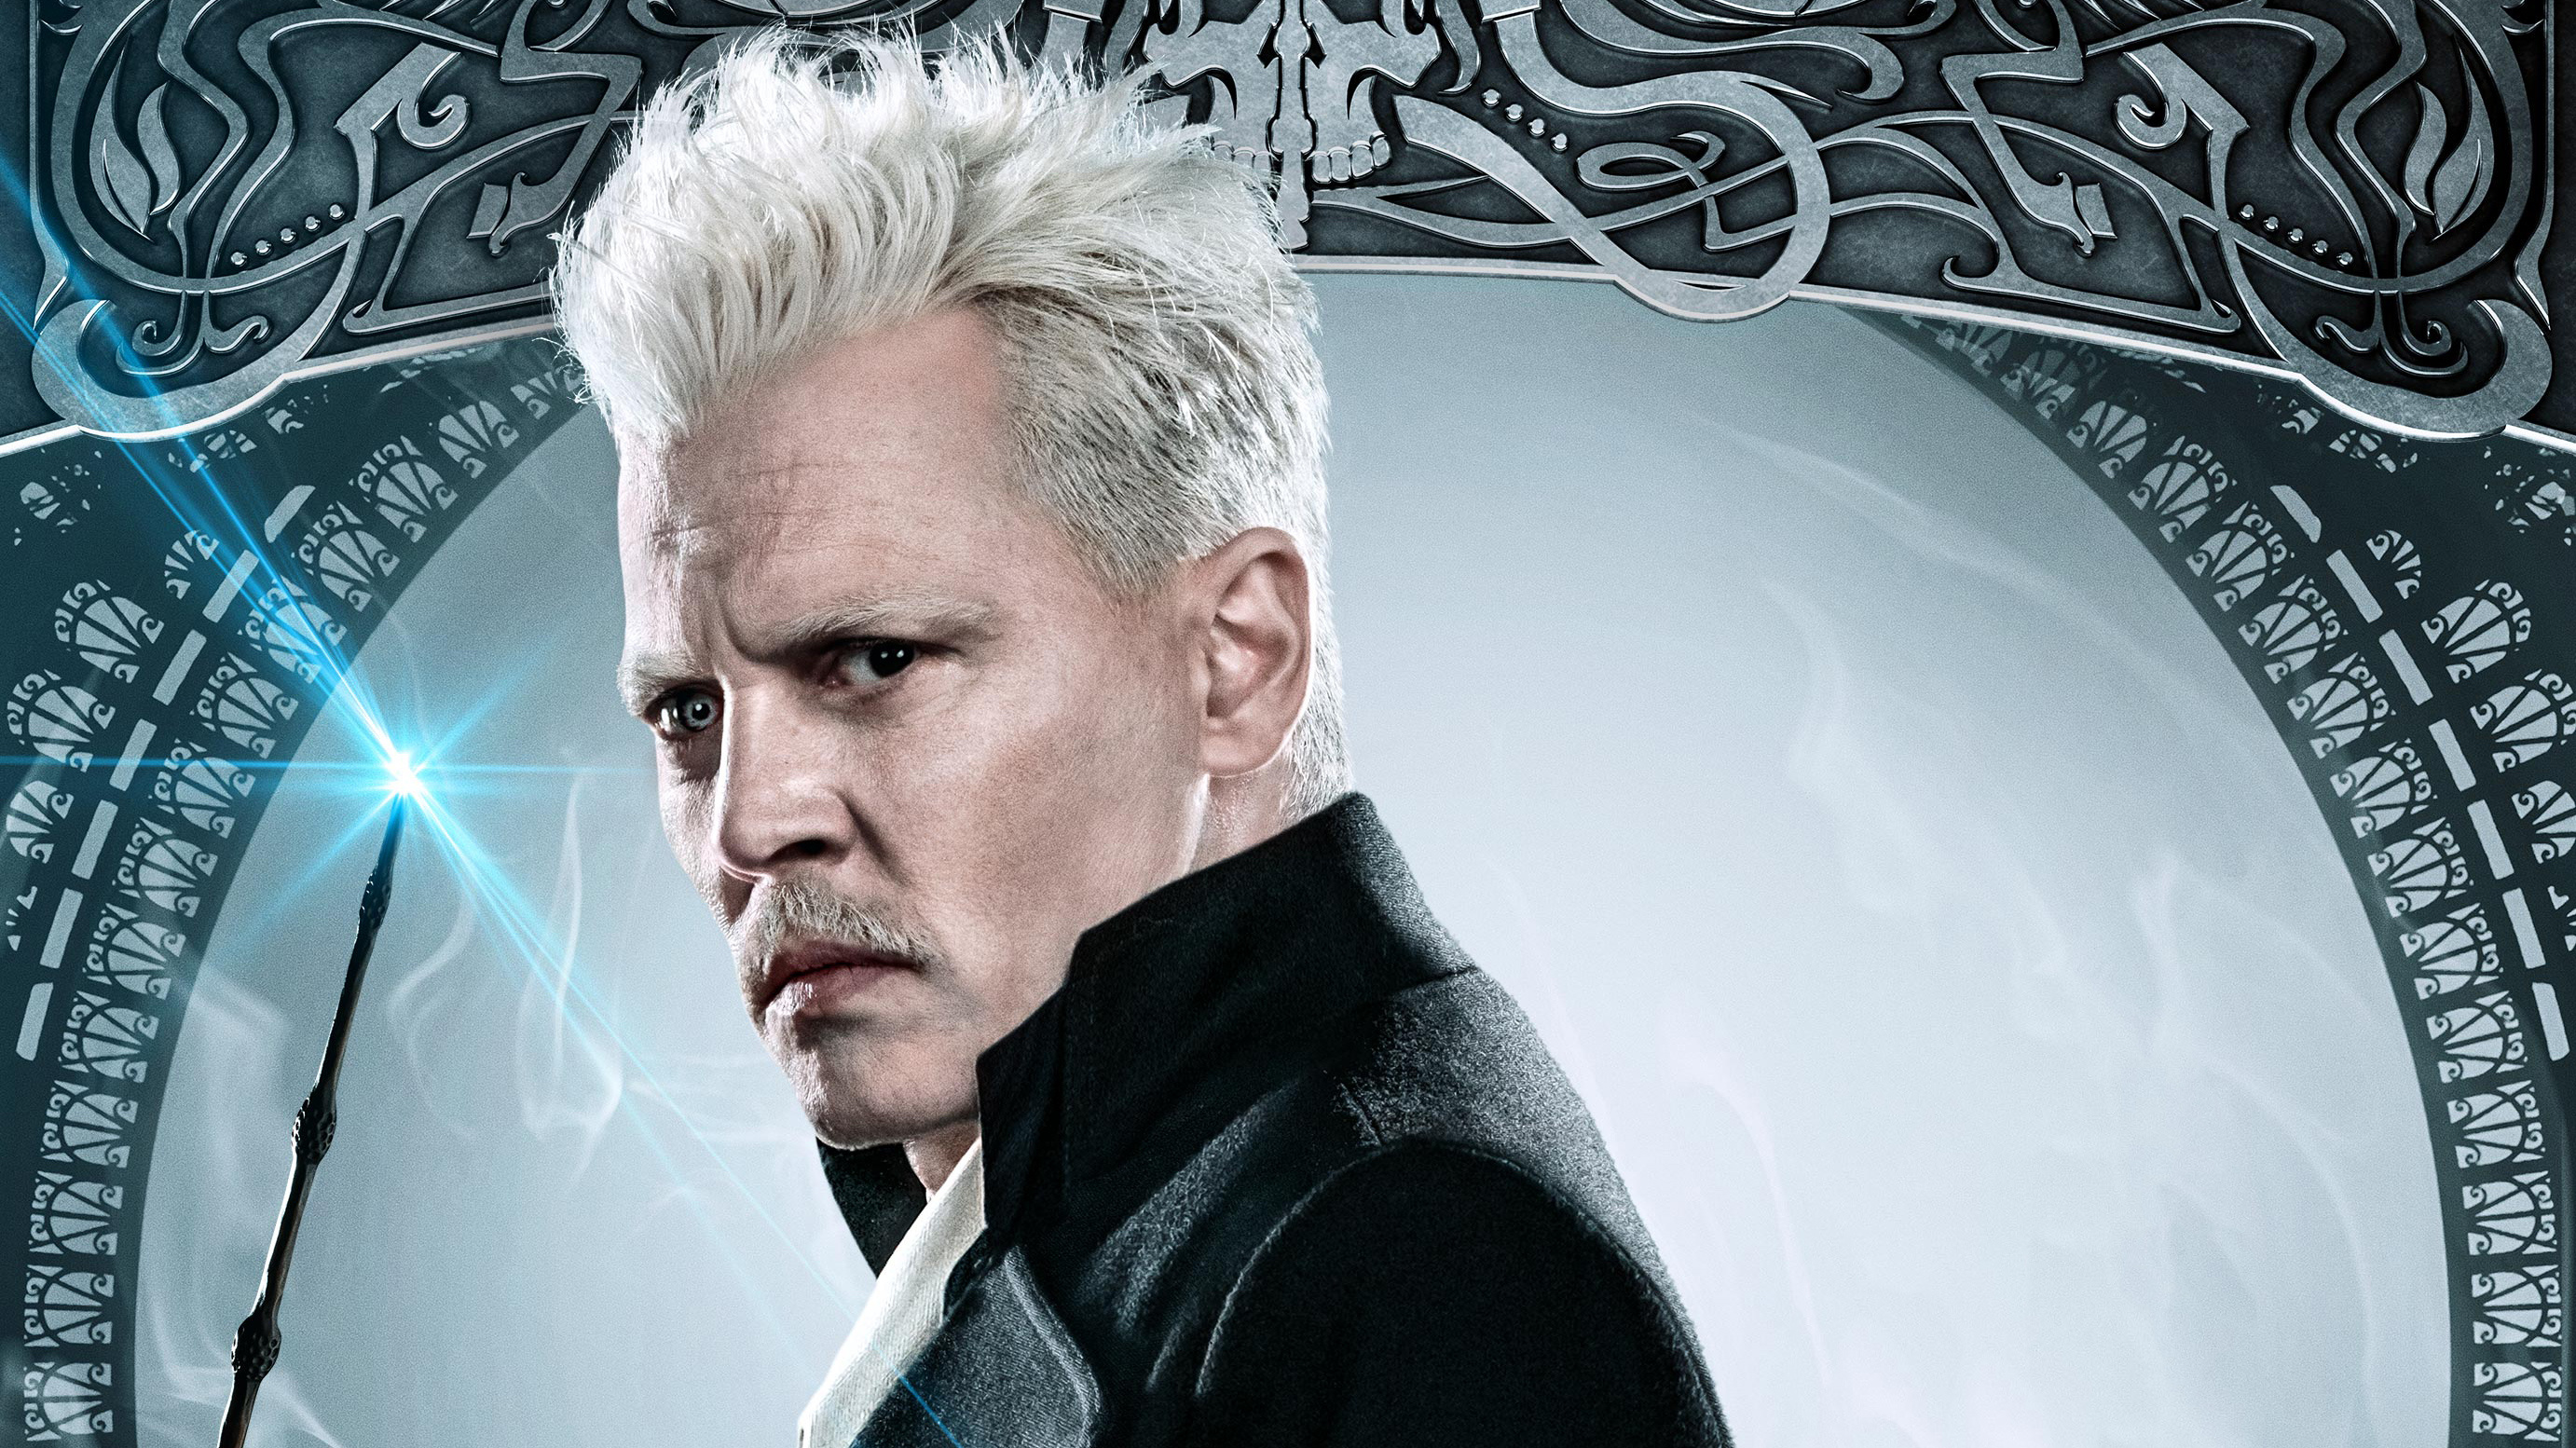 Johnny Depp as Grindelwald, Crimes of Grindelwald, HD movies, High-quality wallpapers, 2770x1560 HD Desktop